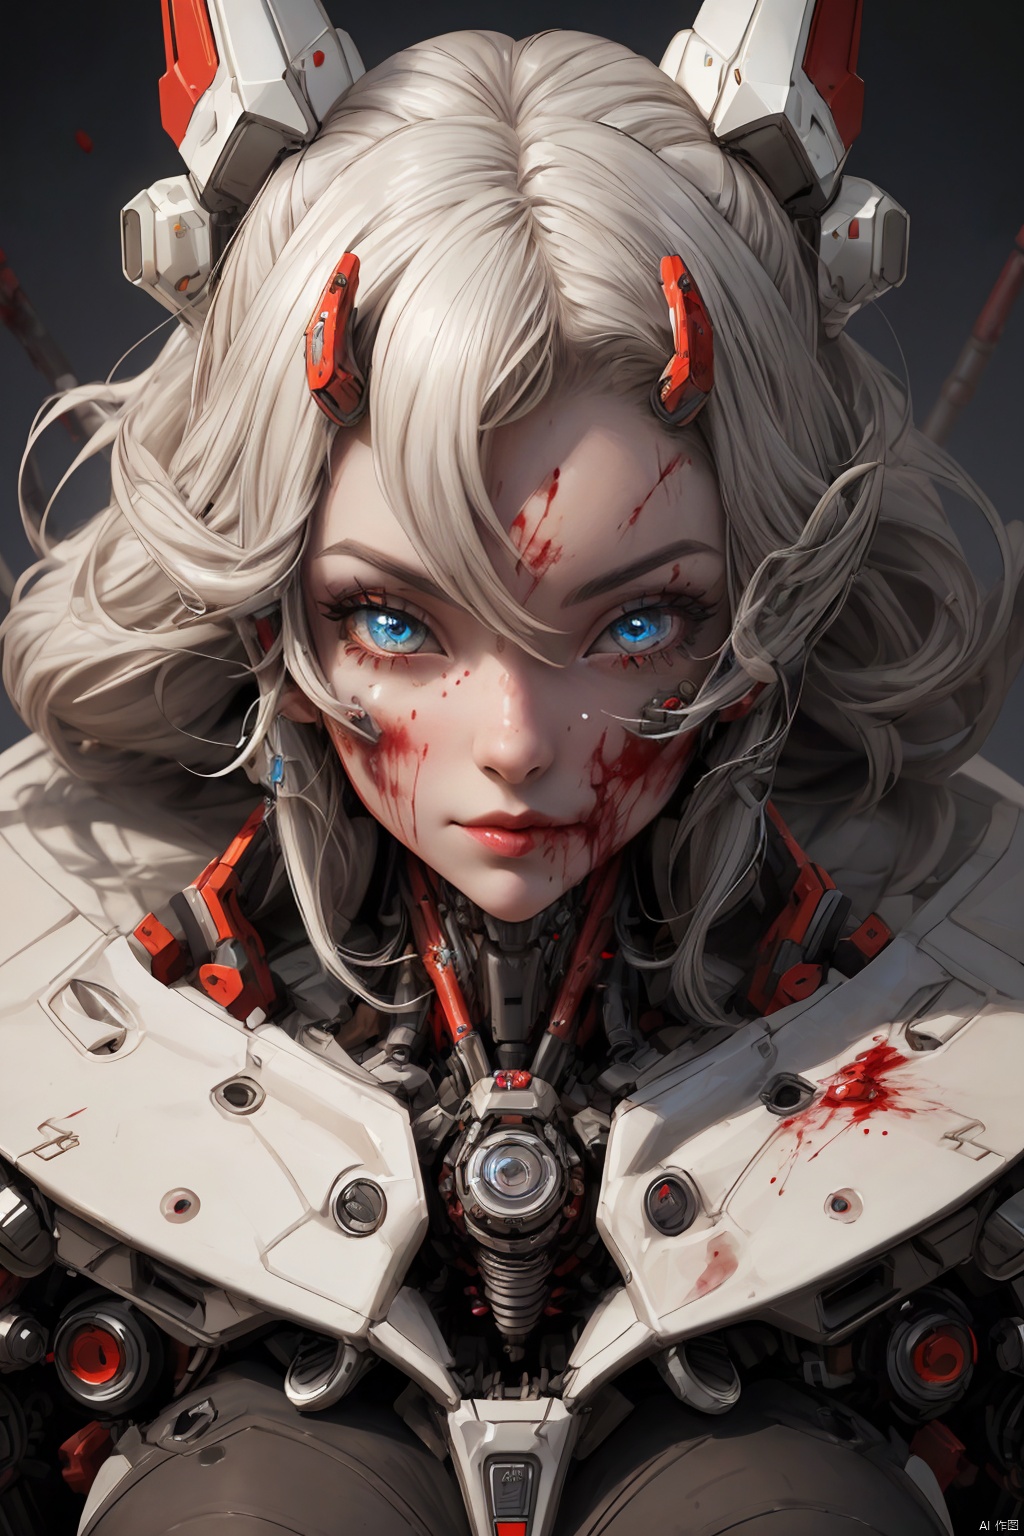 Doomsday world, mechanical style, a girl with a mechanical body, art design, big eyes, exquisite face, blood vessels, fine mechanical parts, a lot of details, ultra-high definition, high quality, masterpiece